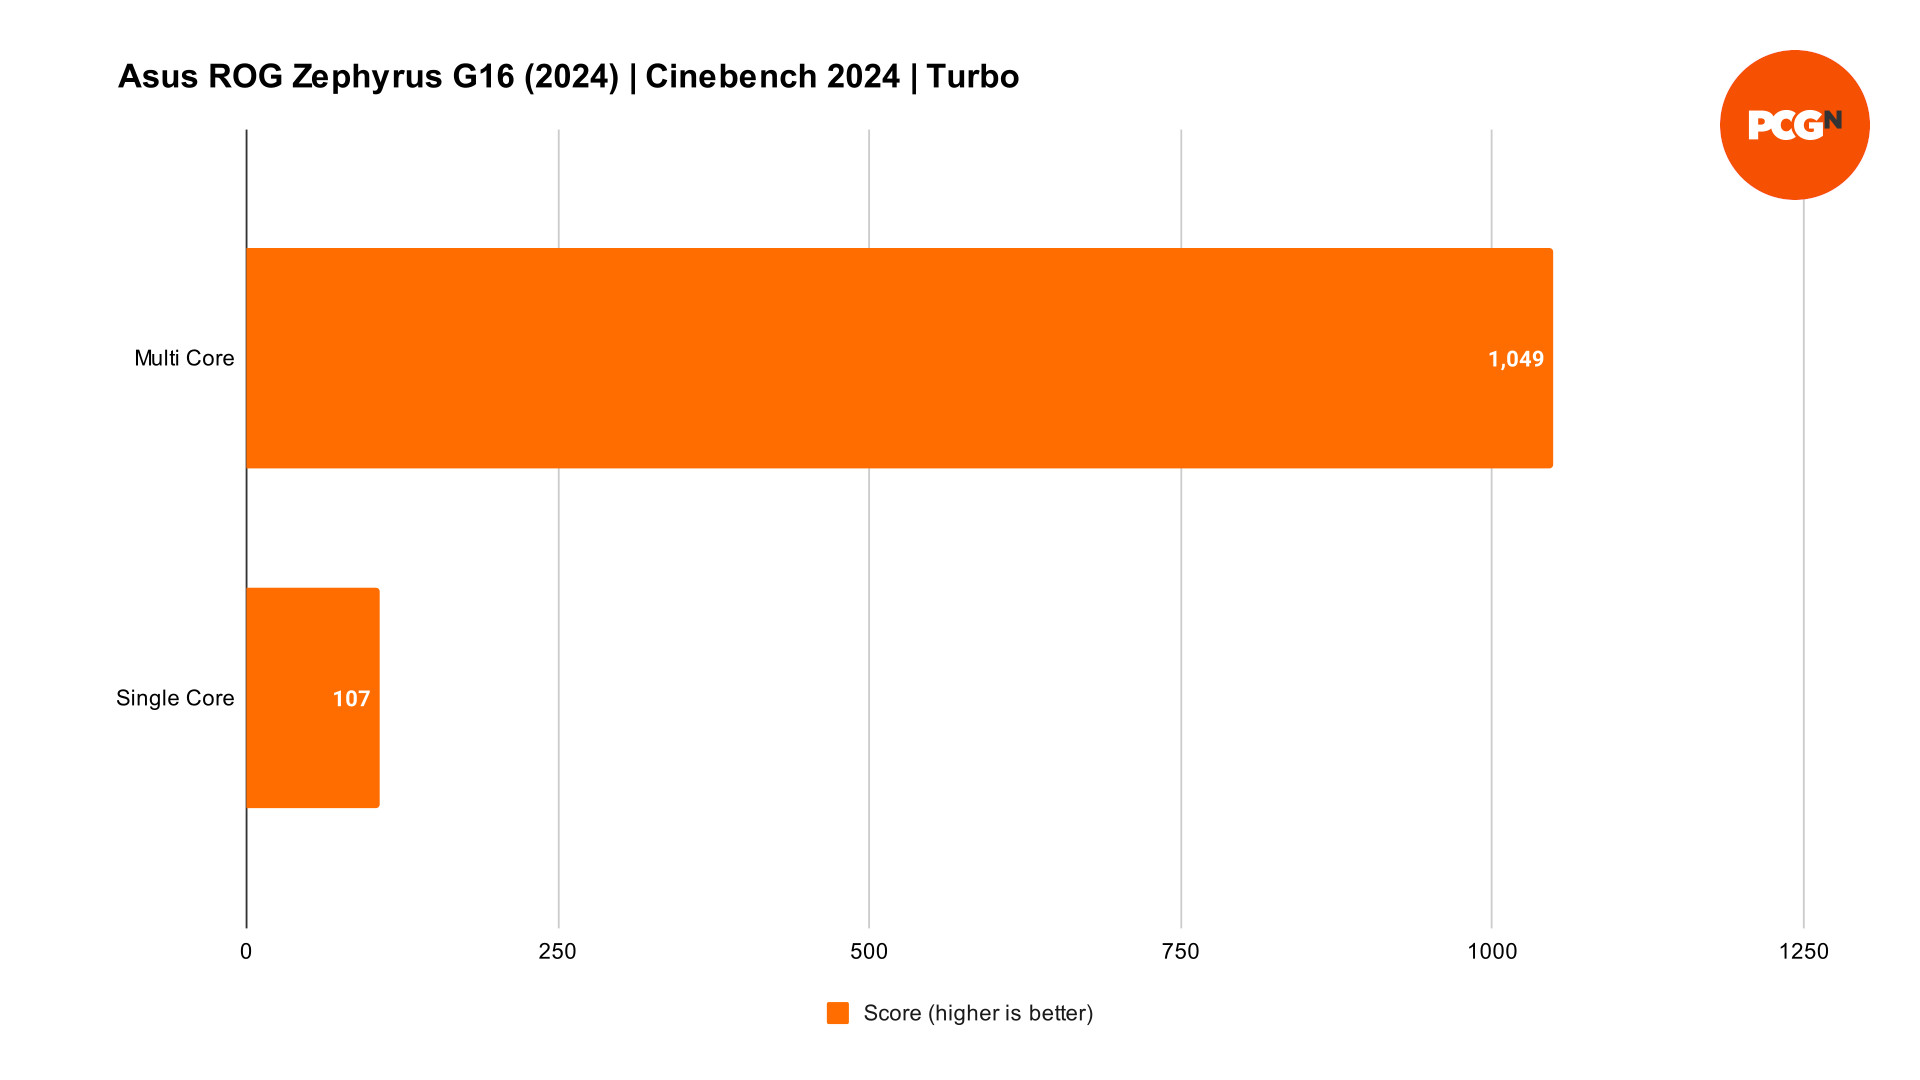 Asus ROG Zephyrus G16 (2024) review: Cinebench results graph